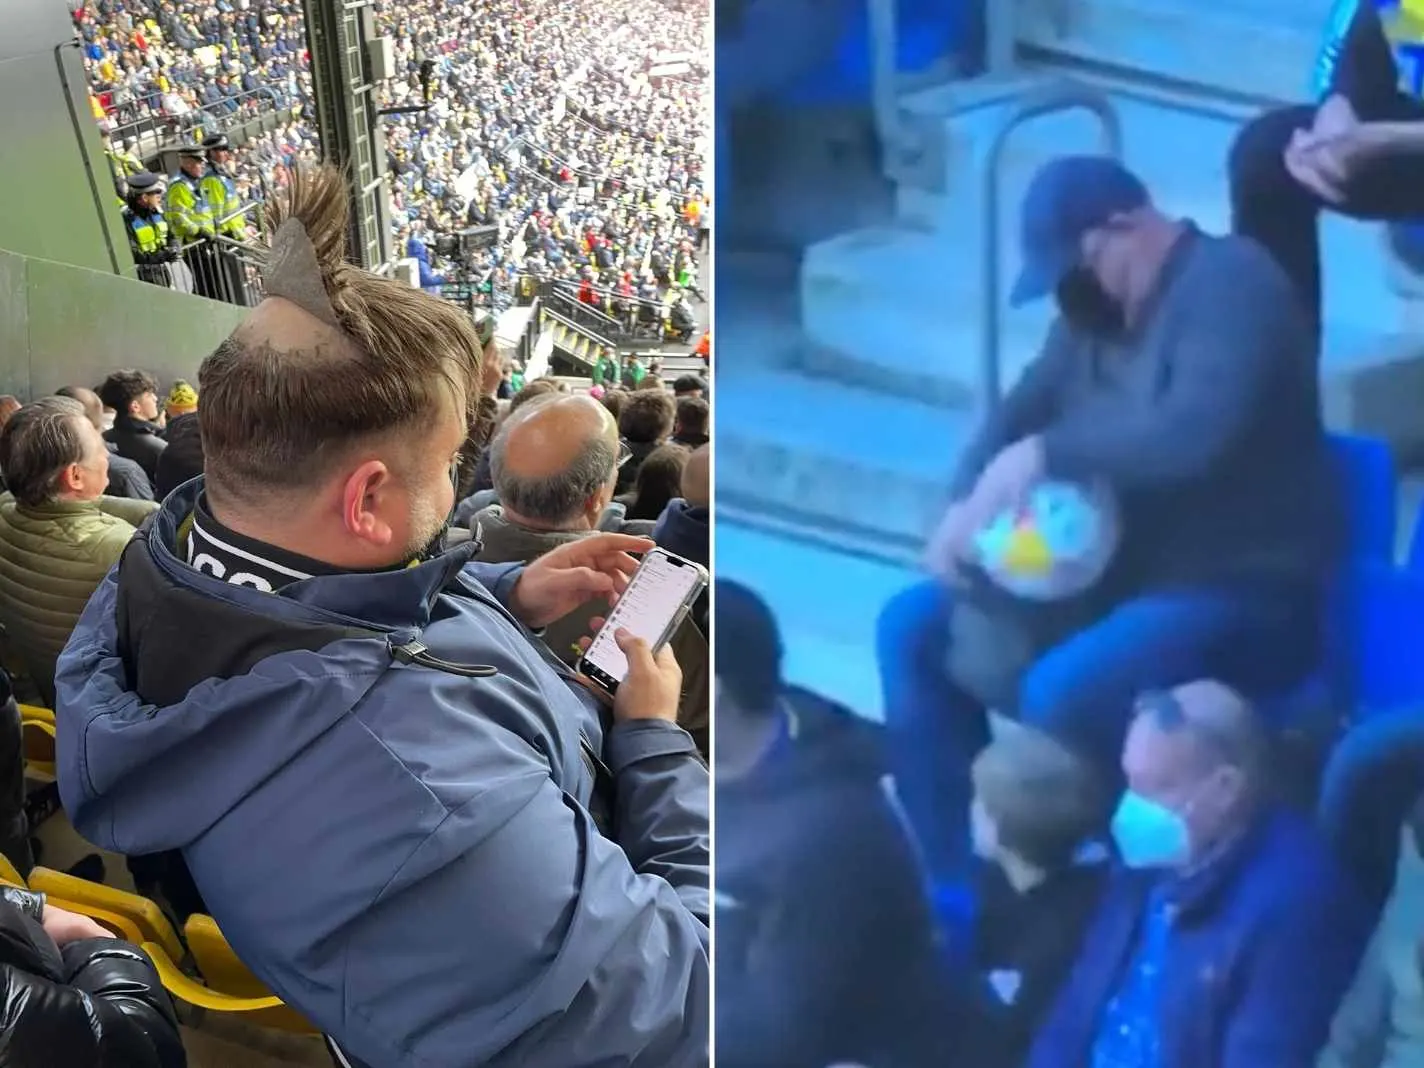 Arsenal fan loses his toupee, while Cadiz supporter steals a football